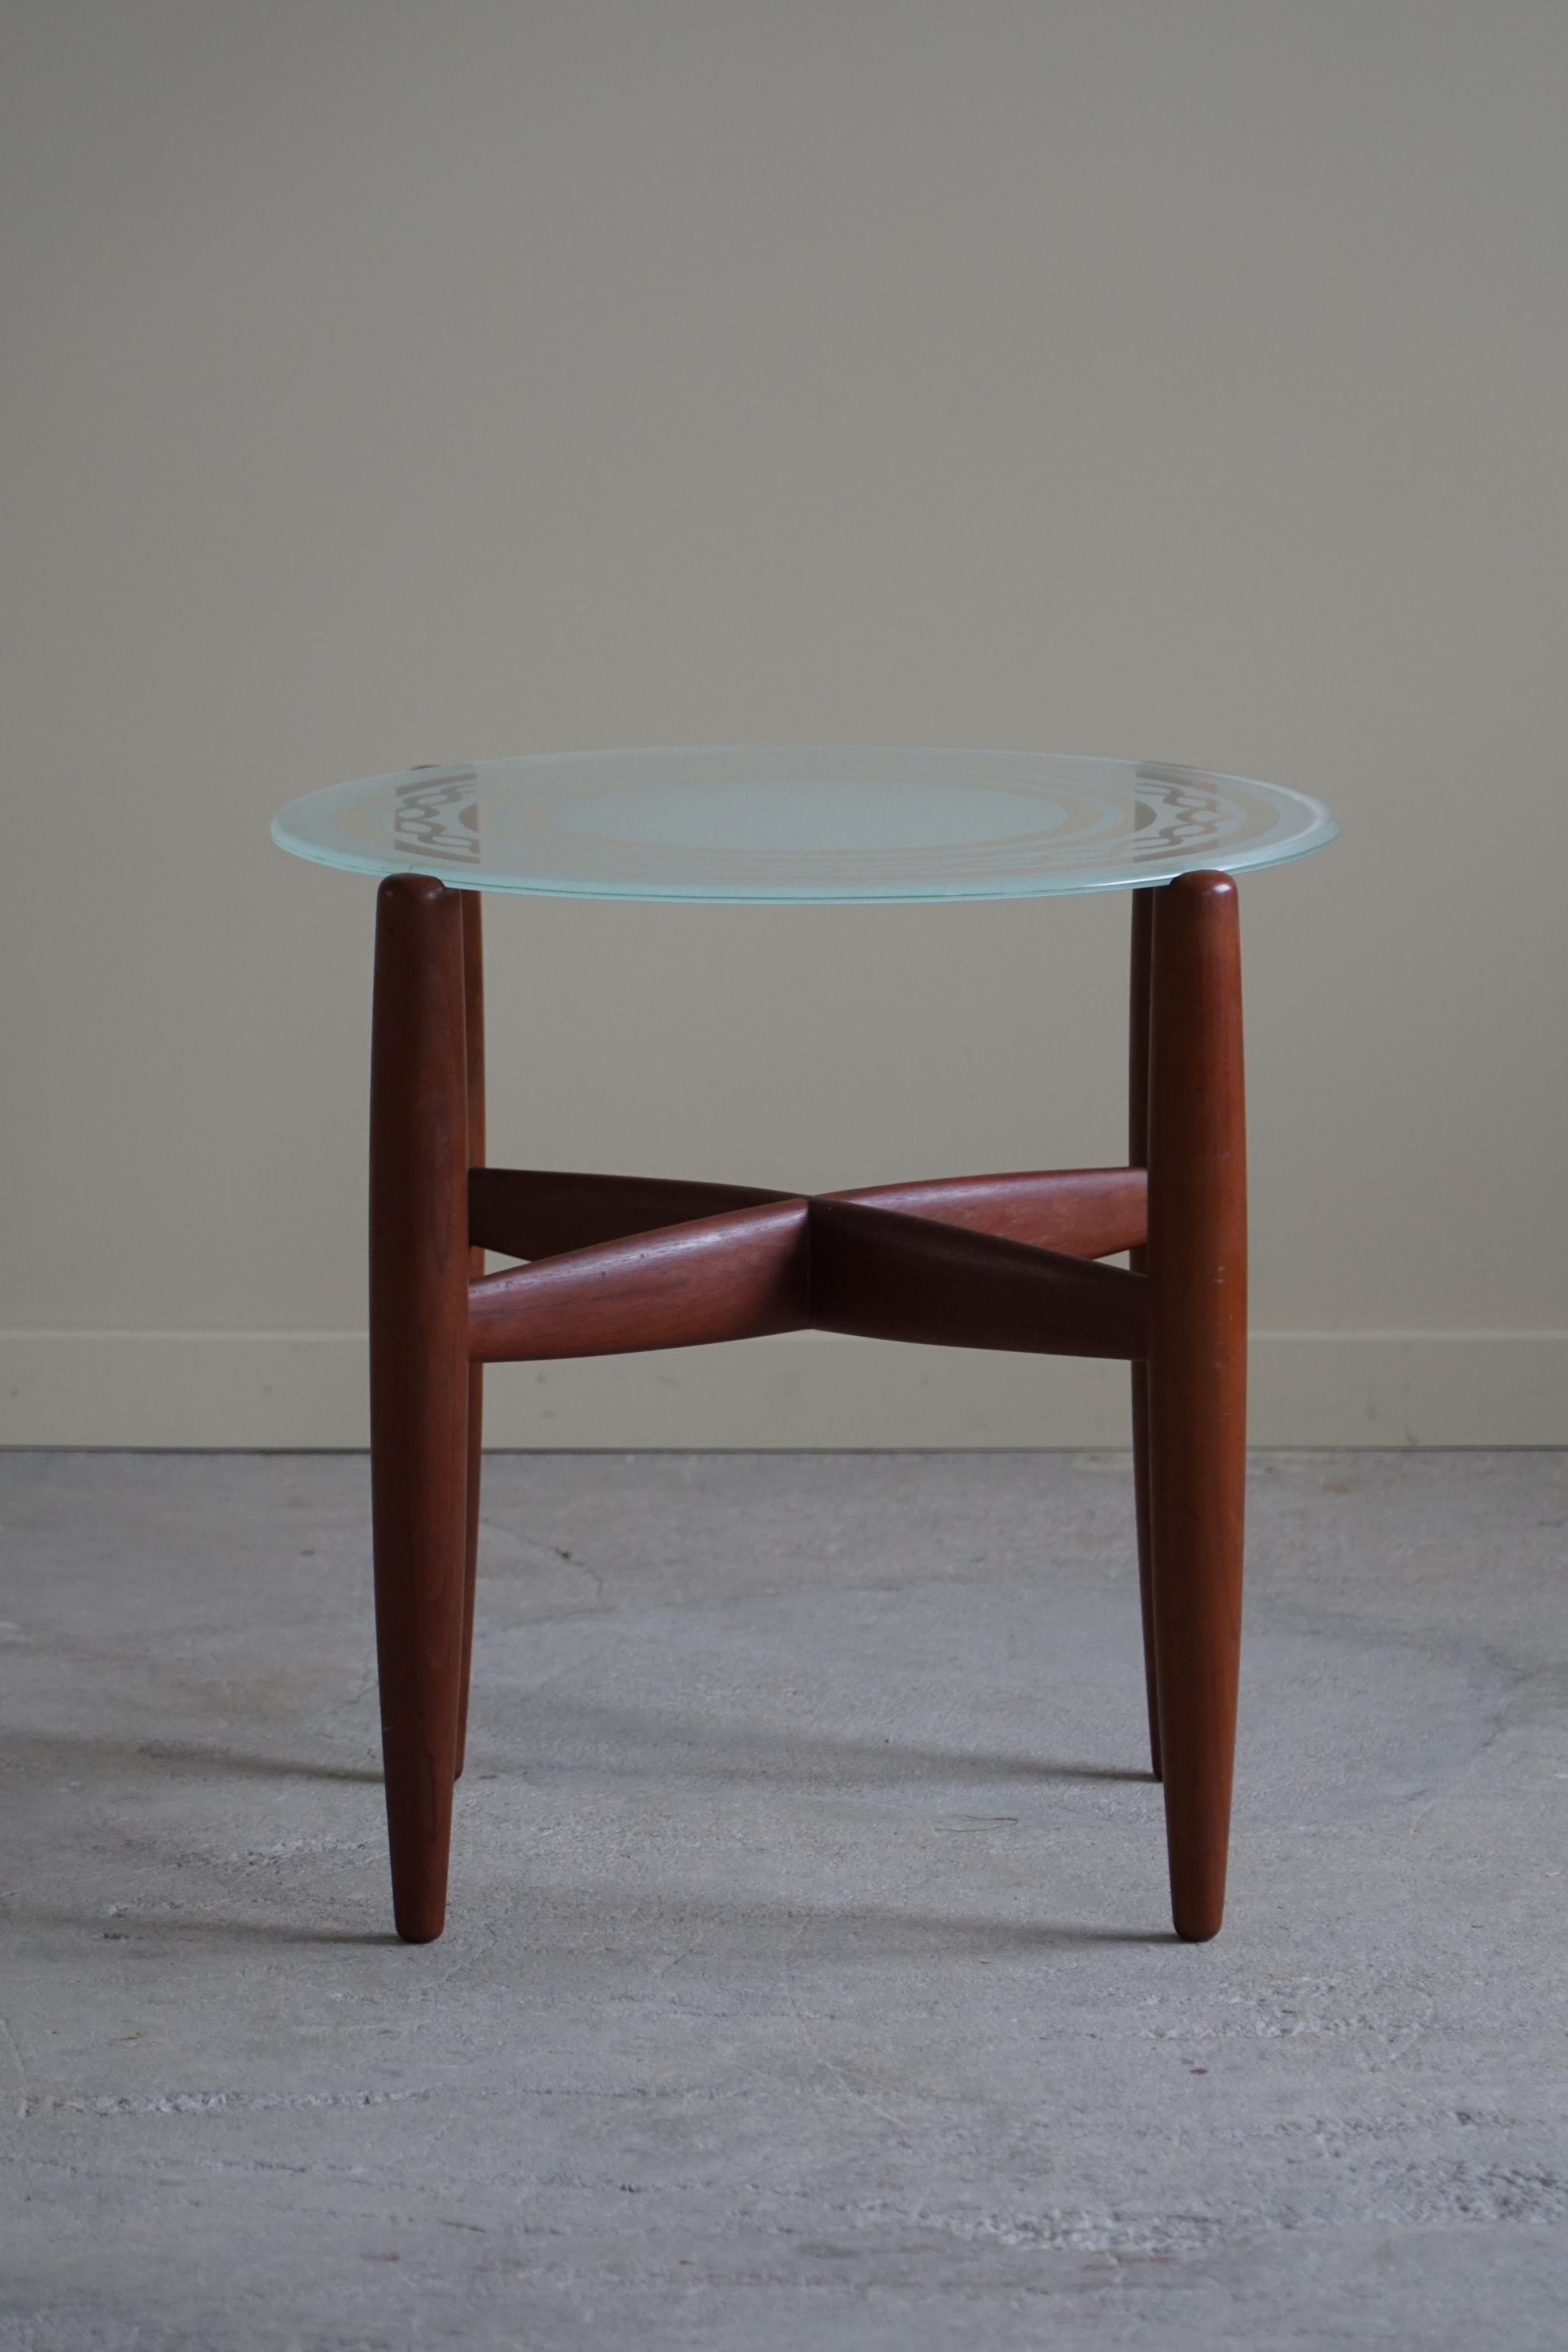 Side Table in Teak & Glass, Danish Mid Century Modern, Made in the 1960s For Sale 4